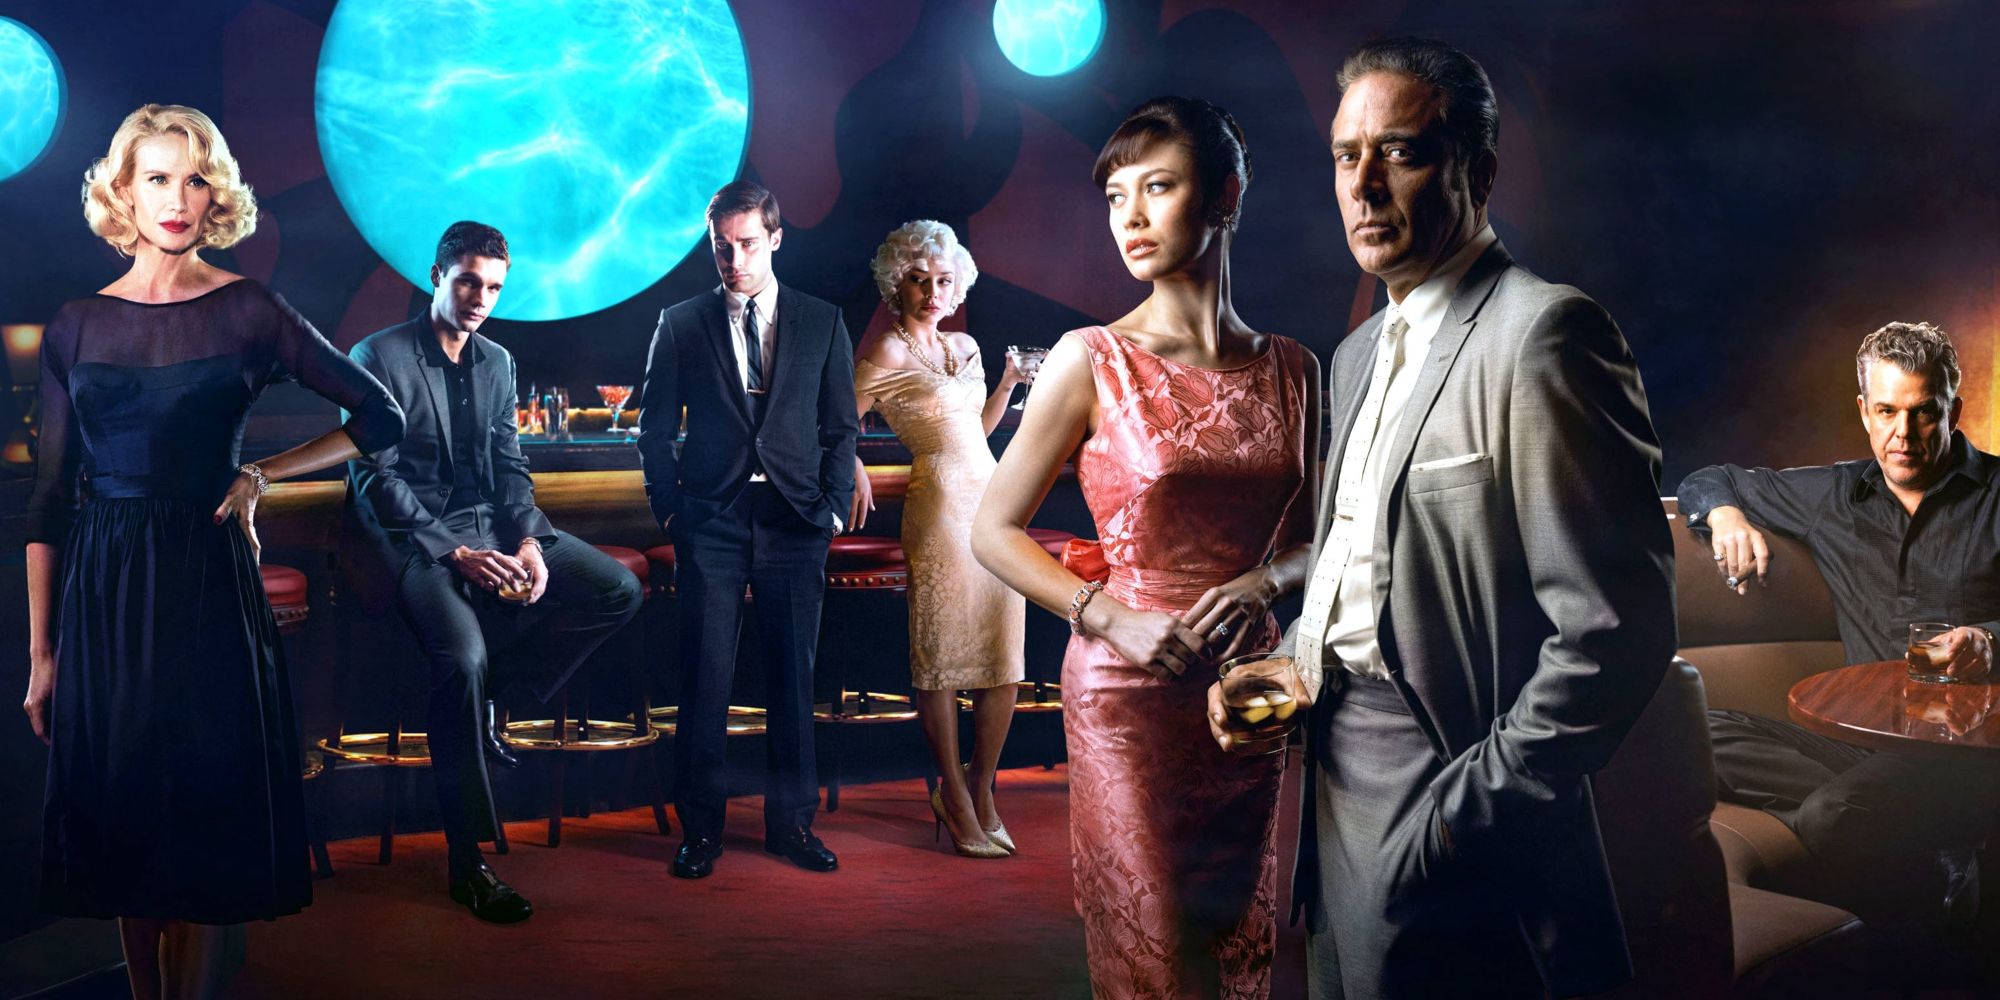 The glamorous cast of Magic City stare at the camera